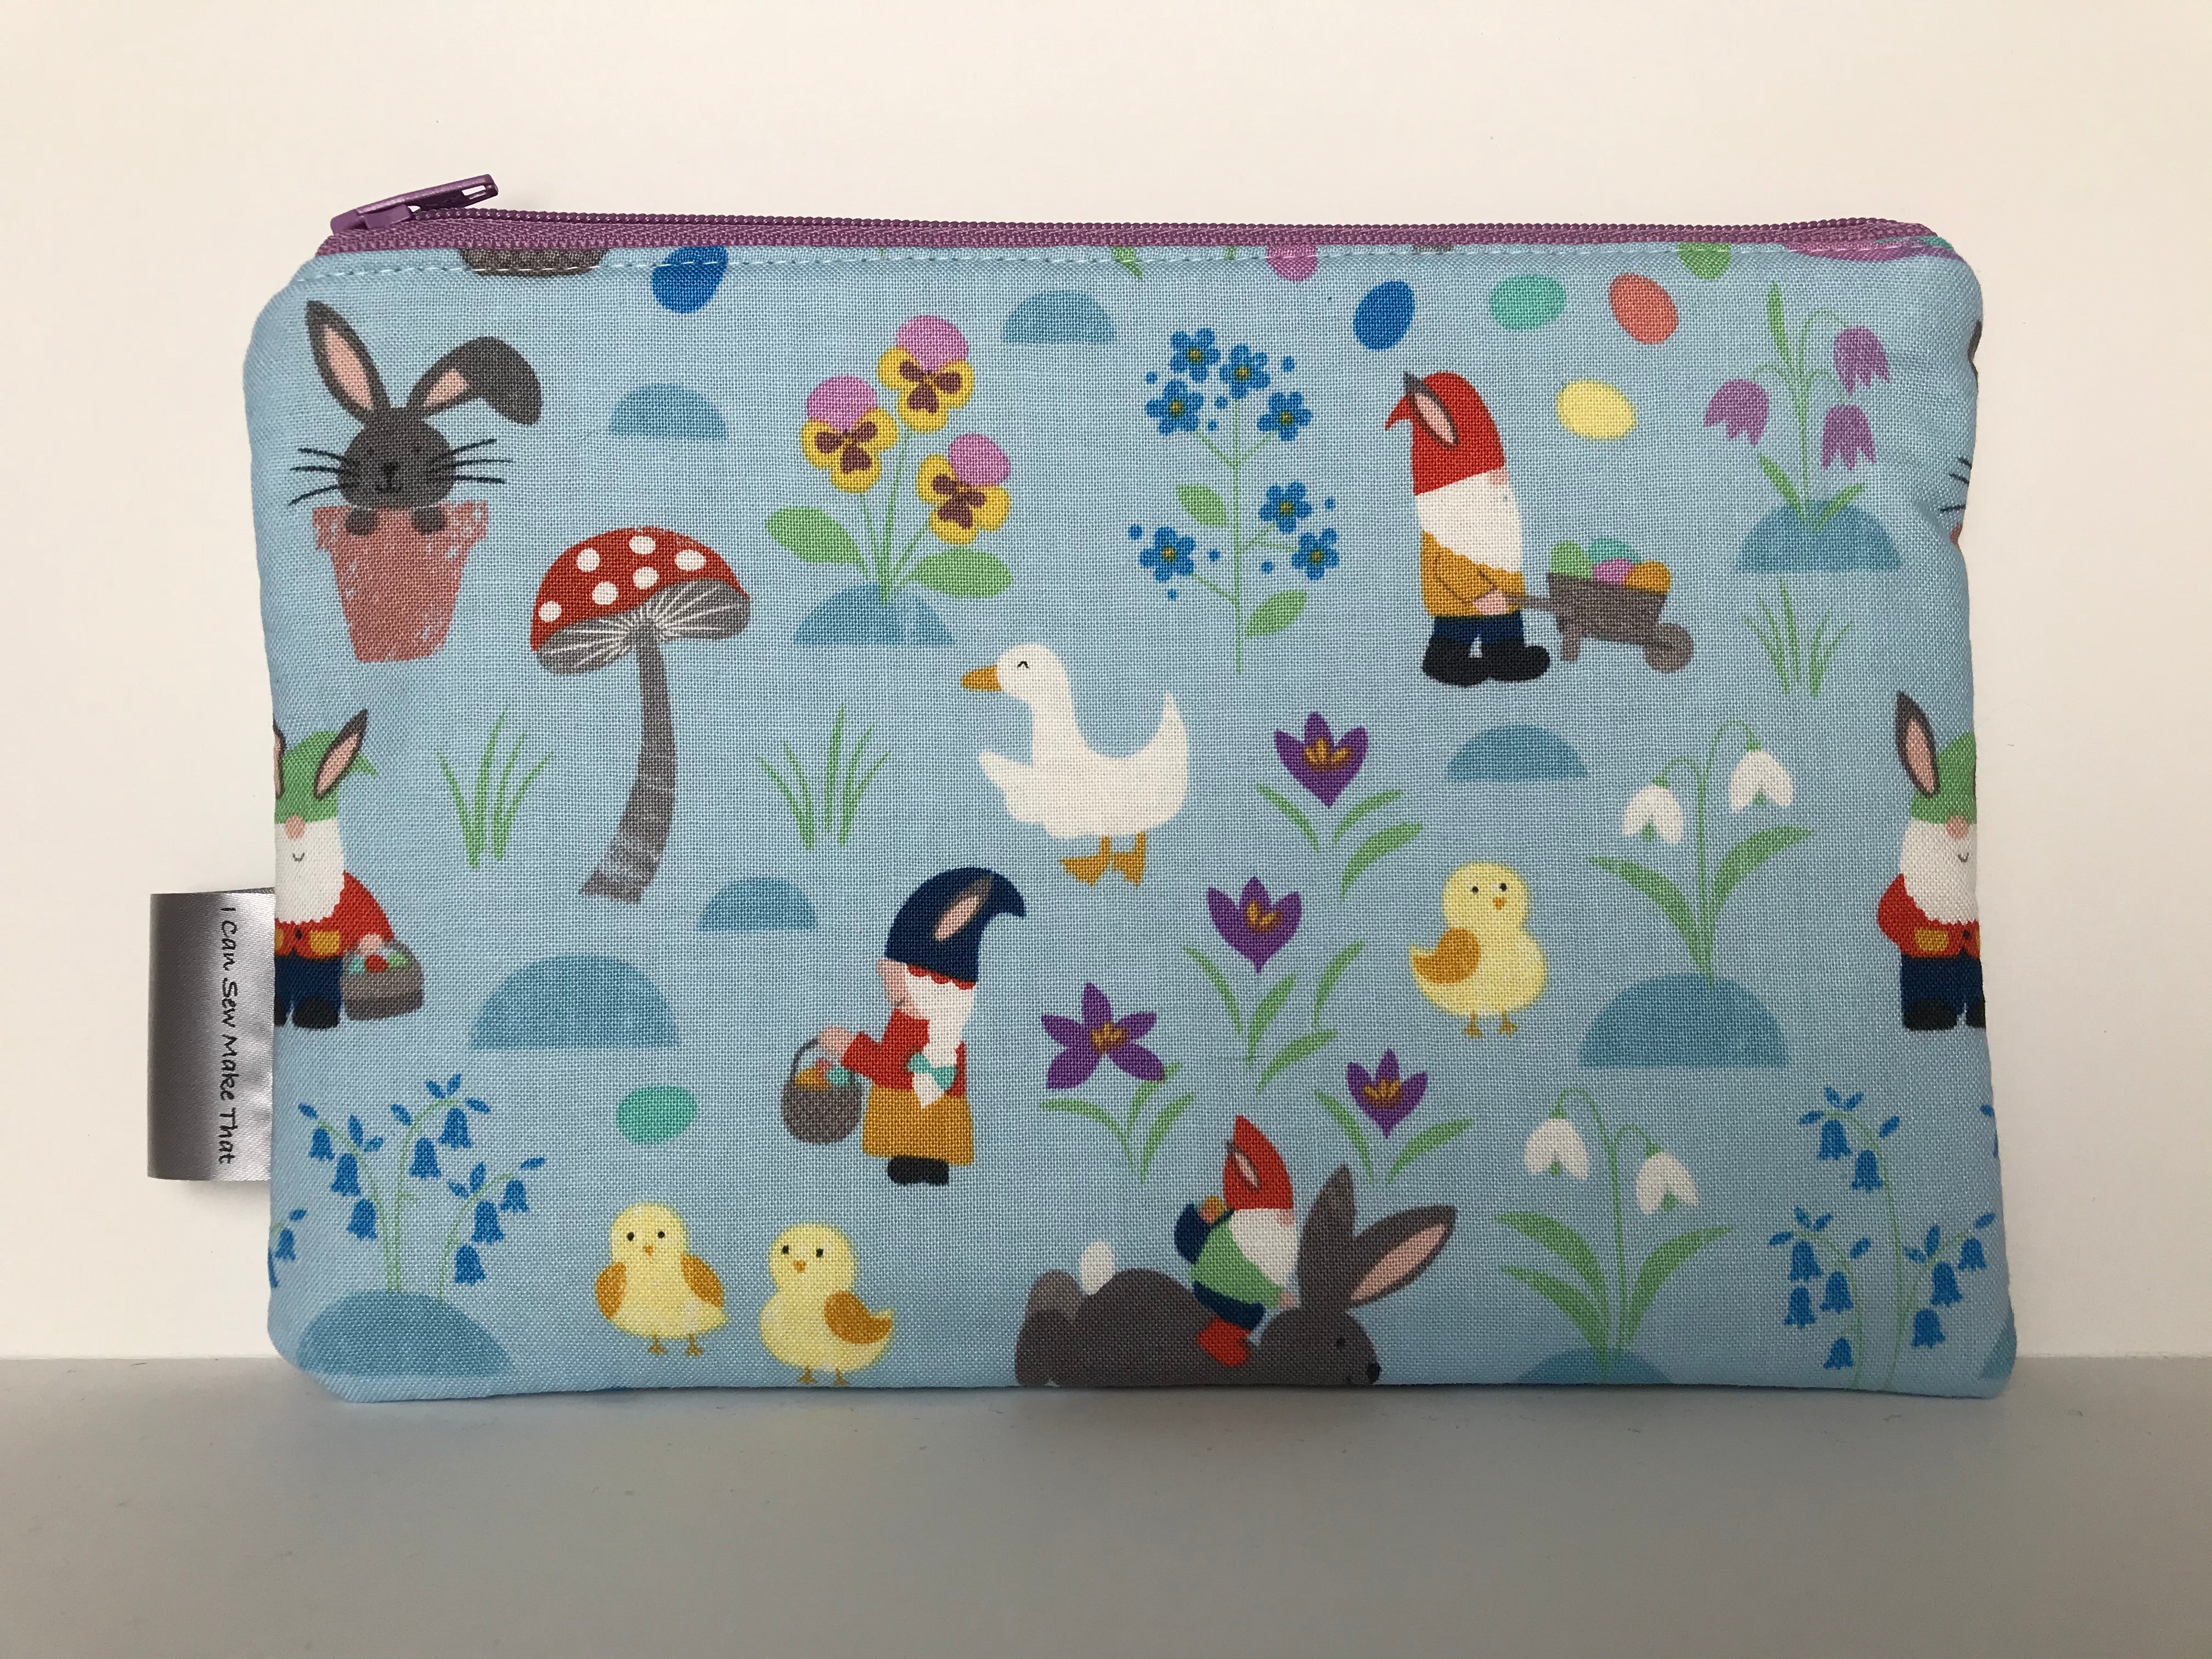 Notion Pouch - Blue with gnome riding a bunny